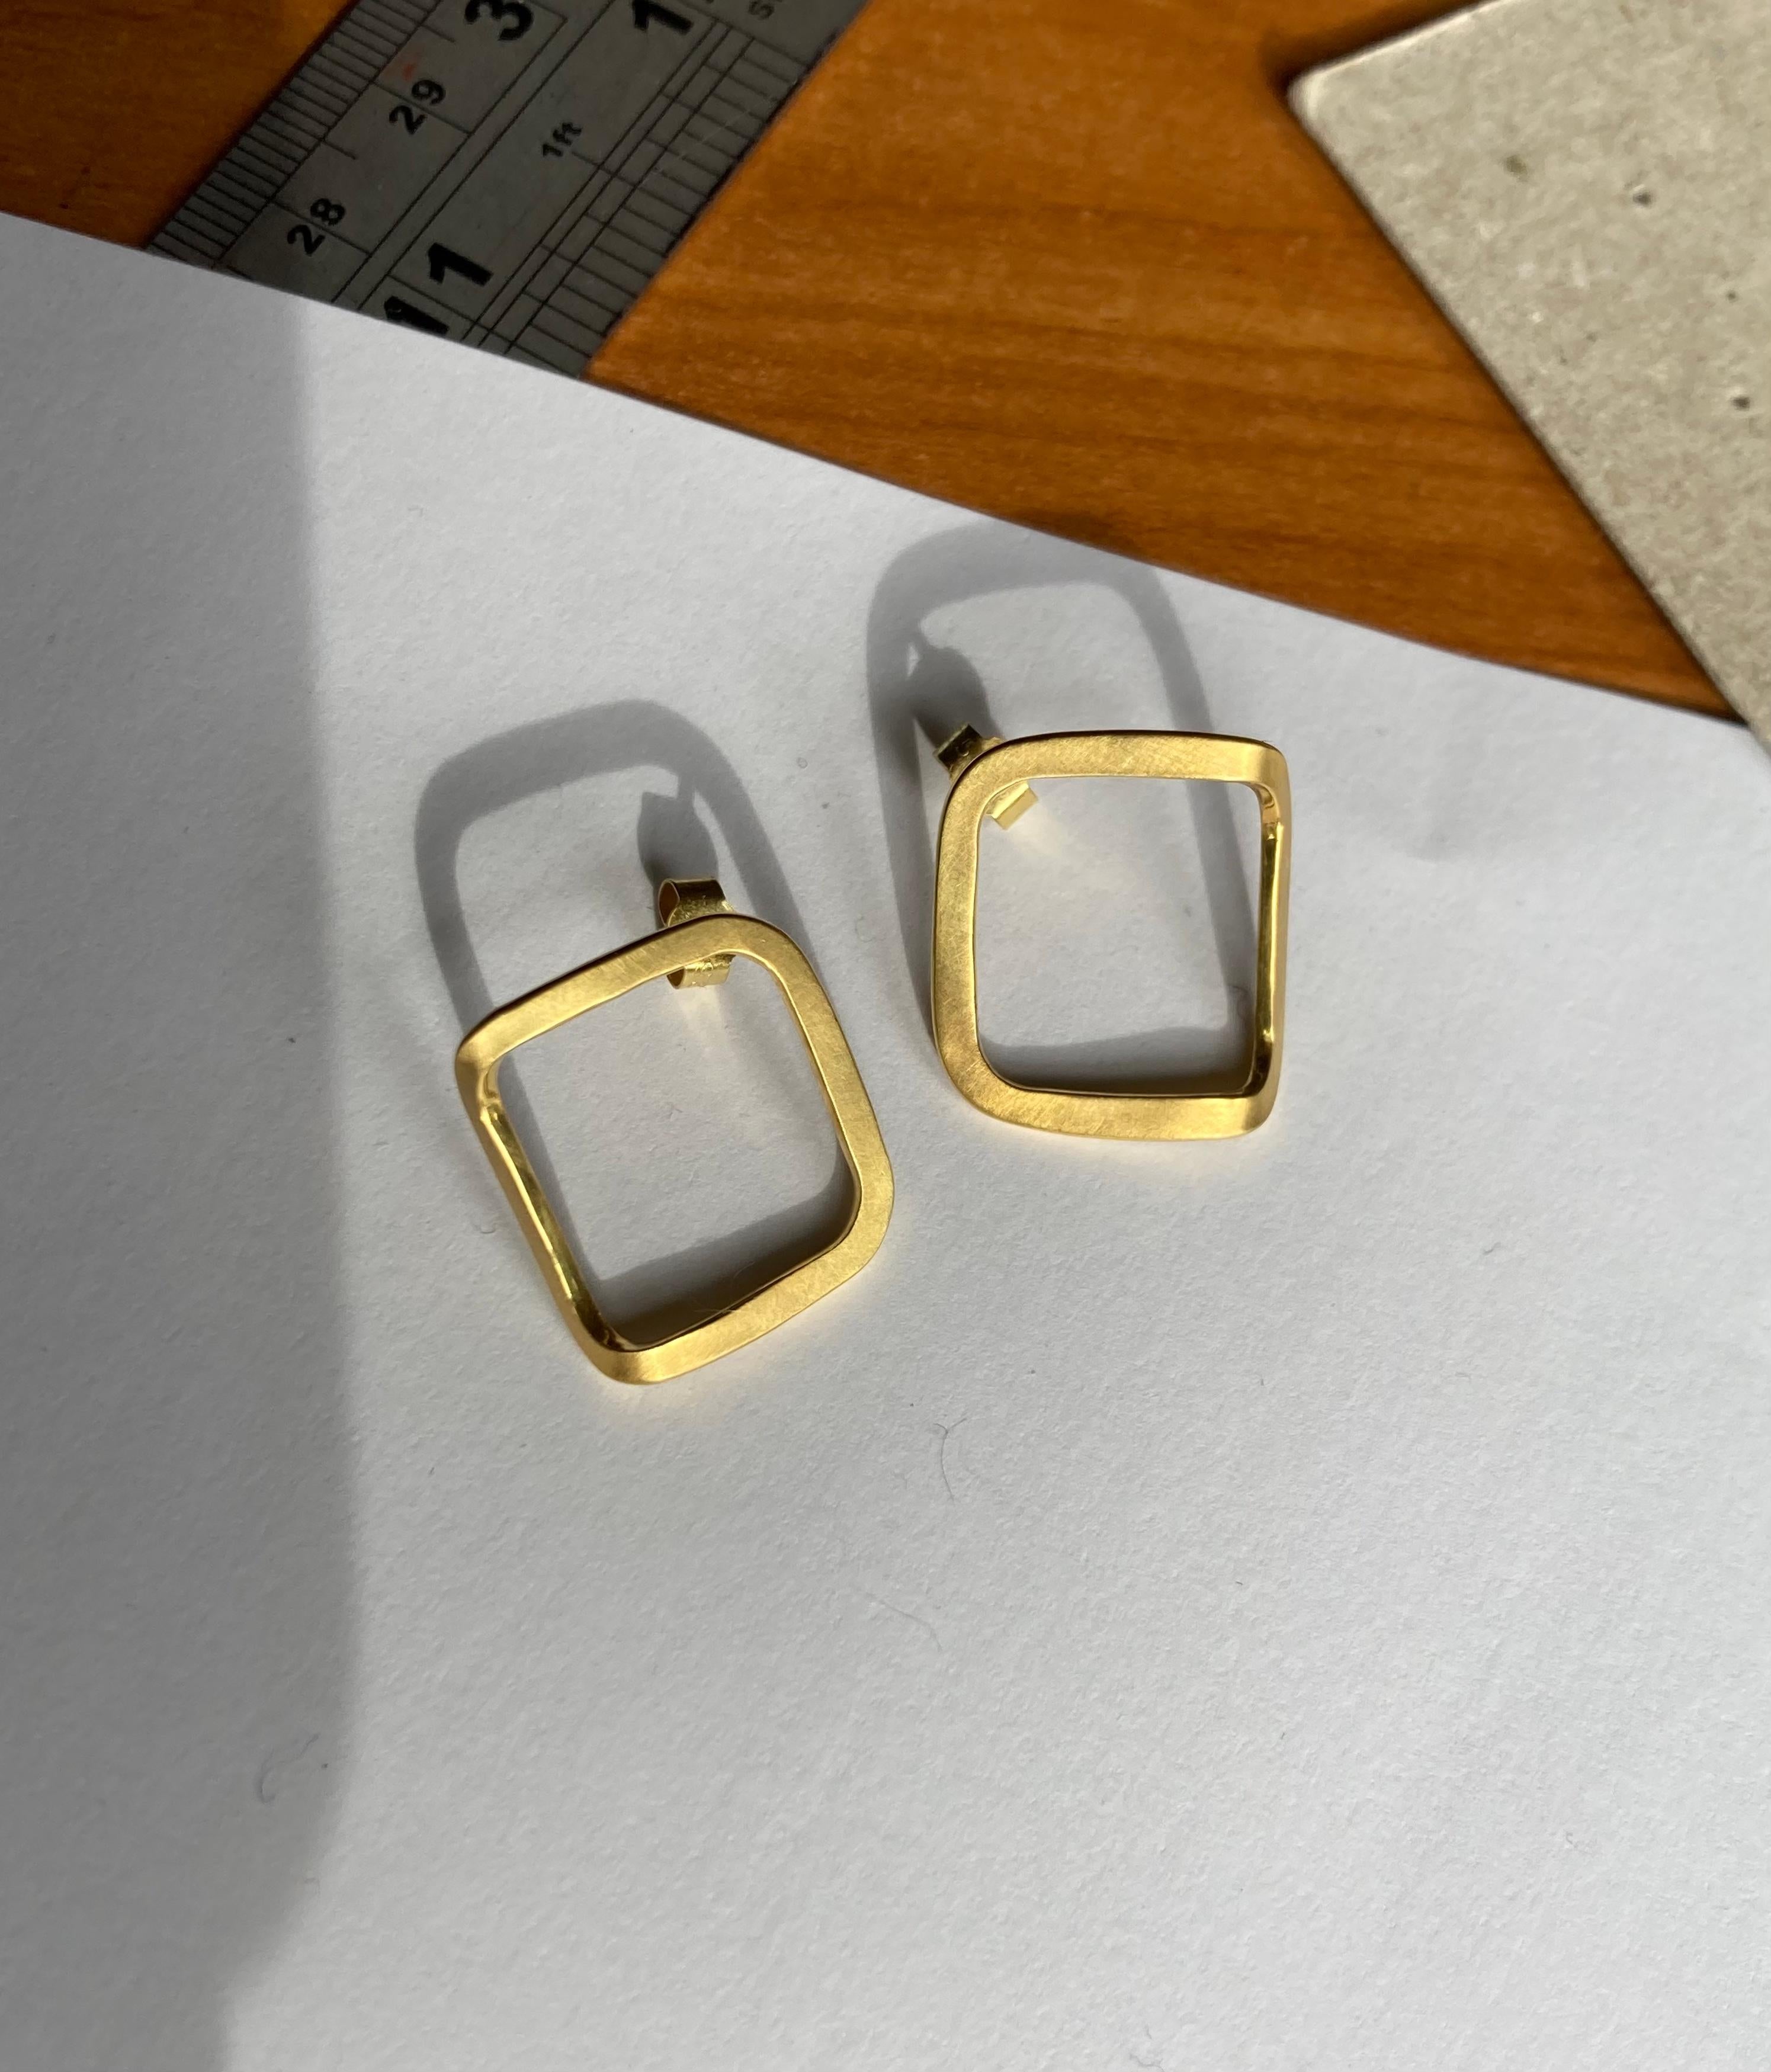 Elegant stud earrings made from forged wire, formed into a folded square. 

The polished inside surface is highlighted by the fold and catches the light when worn. 

They are secured to the ear with a classic butterfly back, and are a comfortable